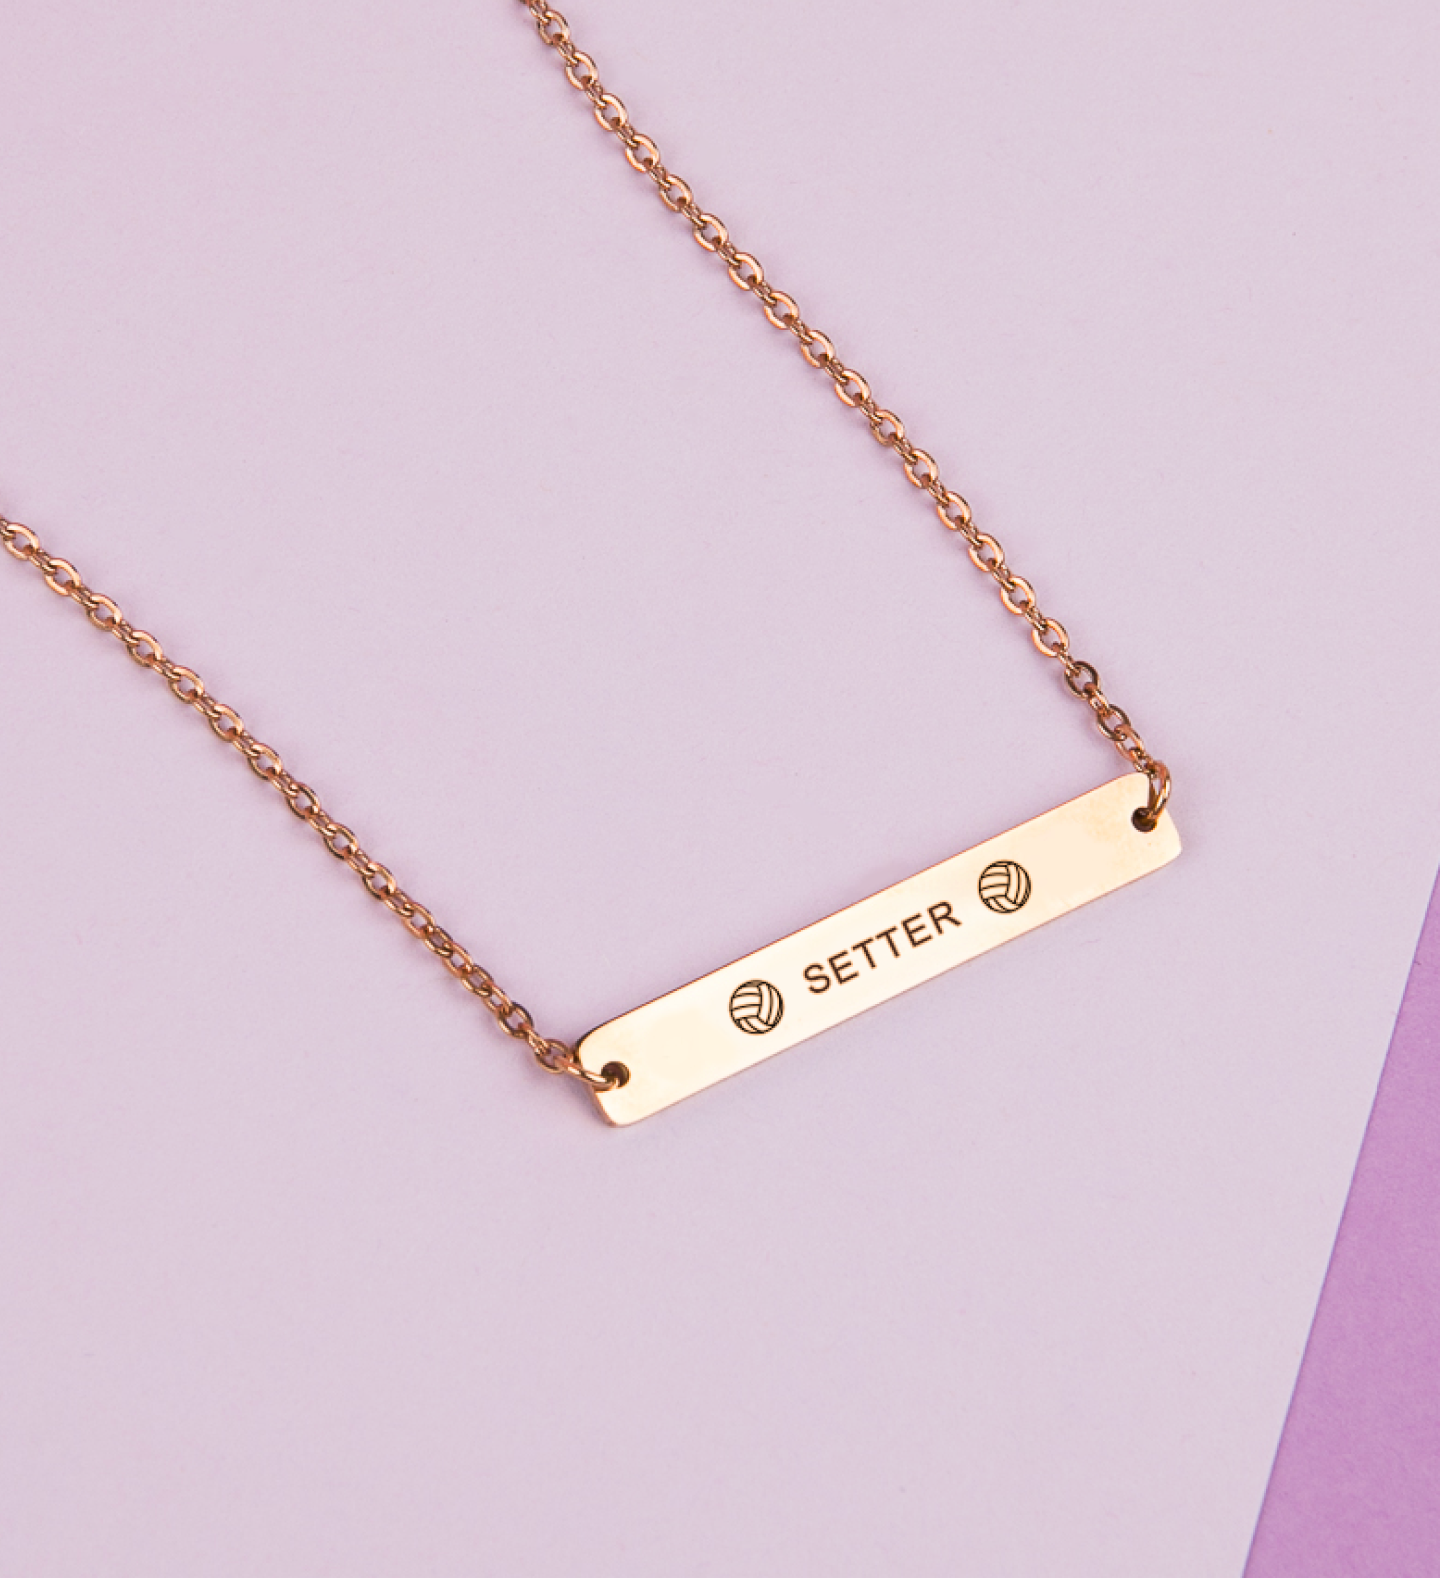 Setter - Volleyball Position Engraved Necklace Bar